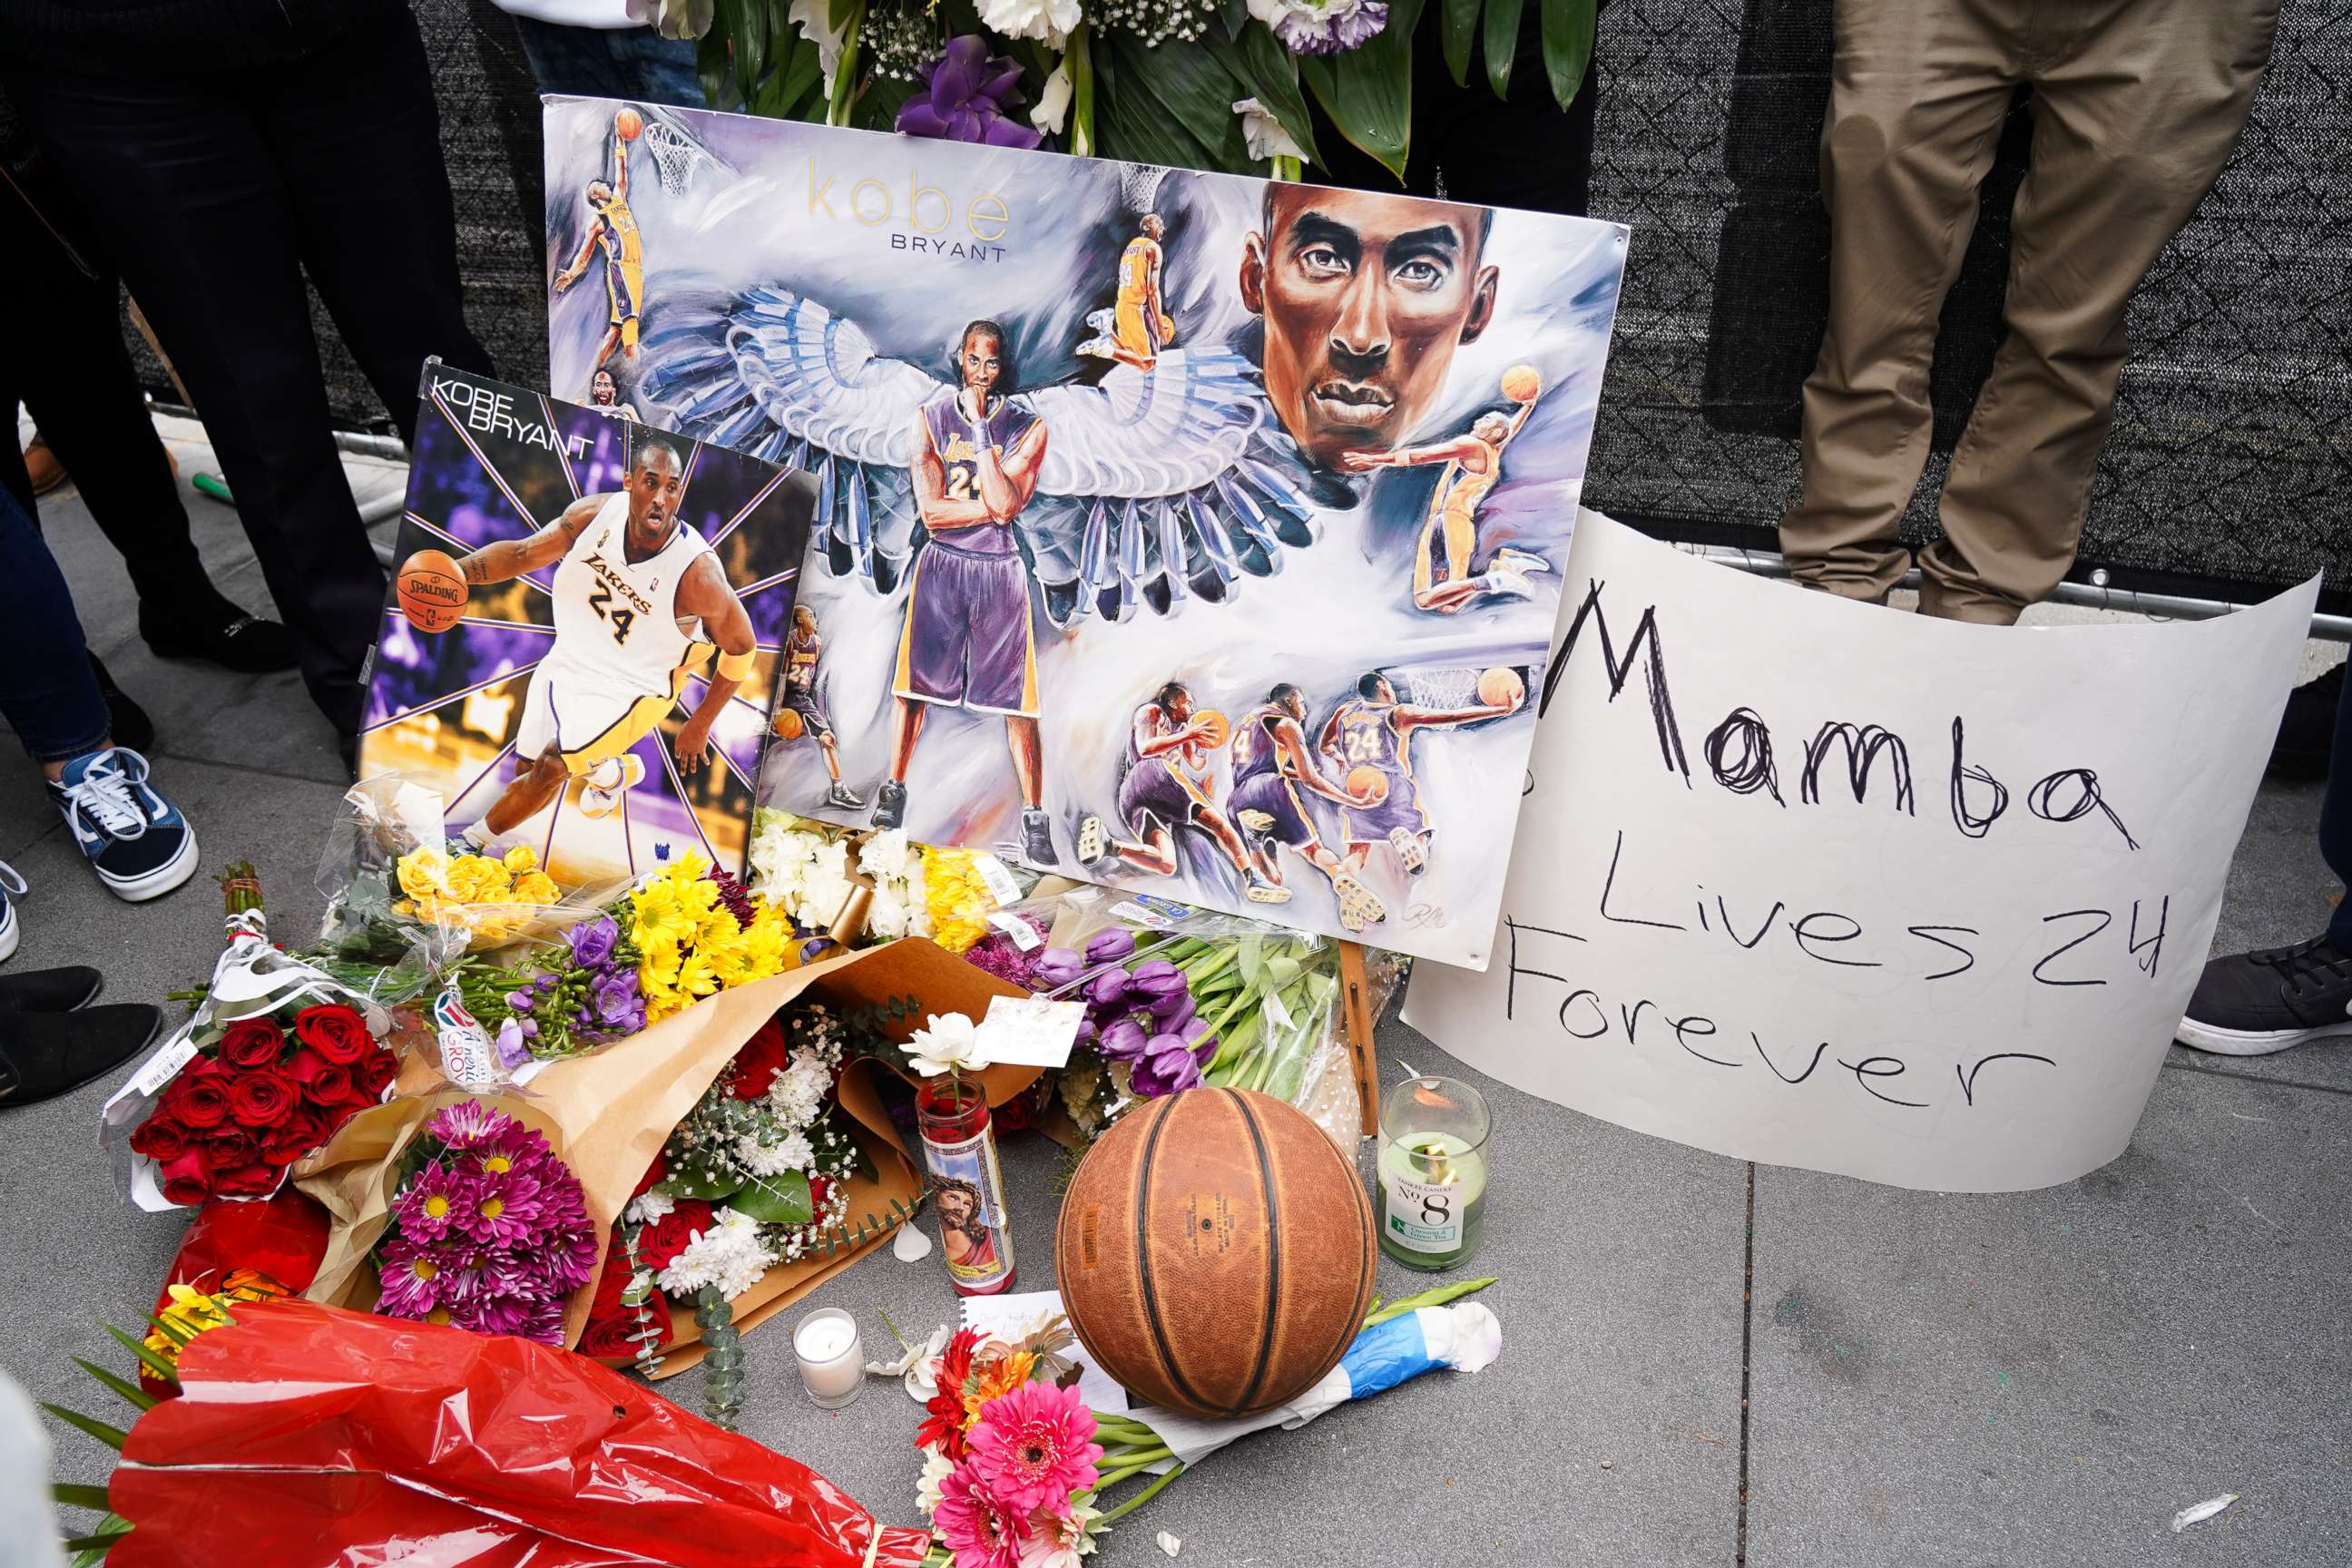 PHOTO: Flowers and tributes are left at a makeshift memorial for former NBA player Kobe Bryant outside the 62nd Annual GRAMMY Awards at STAPLES Center on Jan. 26, 2020, in Los Angeles. Bryant, 41, died today in a helicopter crash in near Calabasas, Calif.